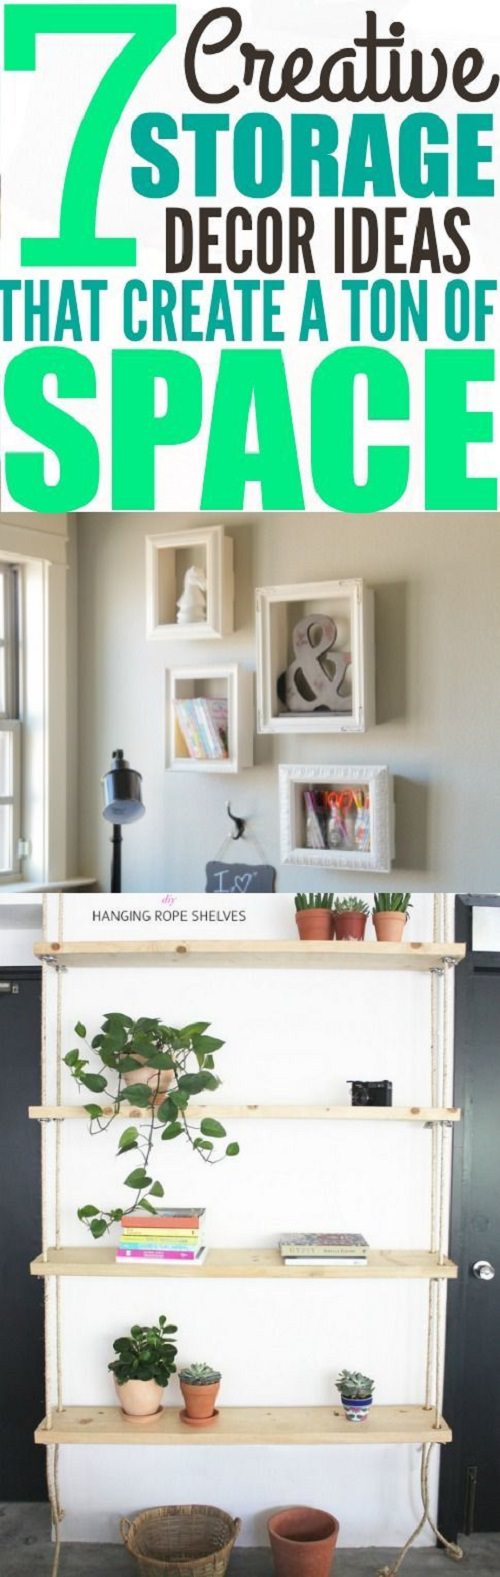 7 Insanely Clever DIY Storage Decor Ideas That Combine Function With ...